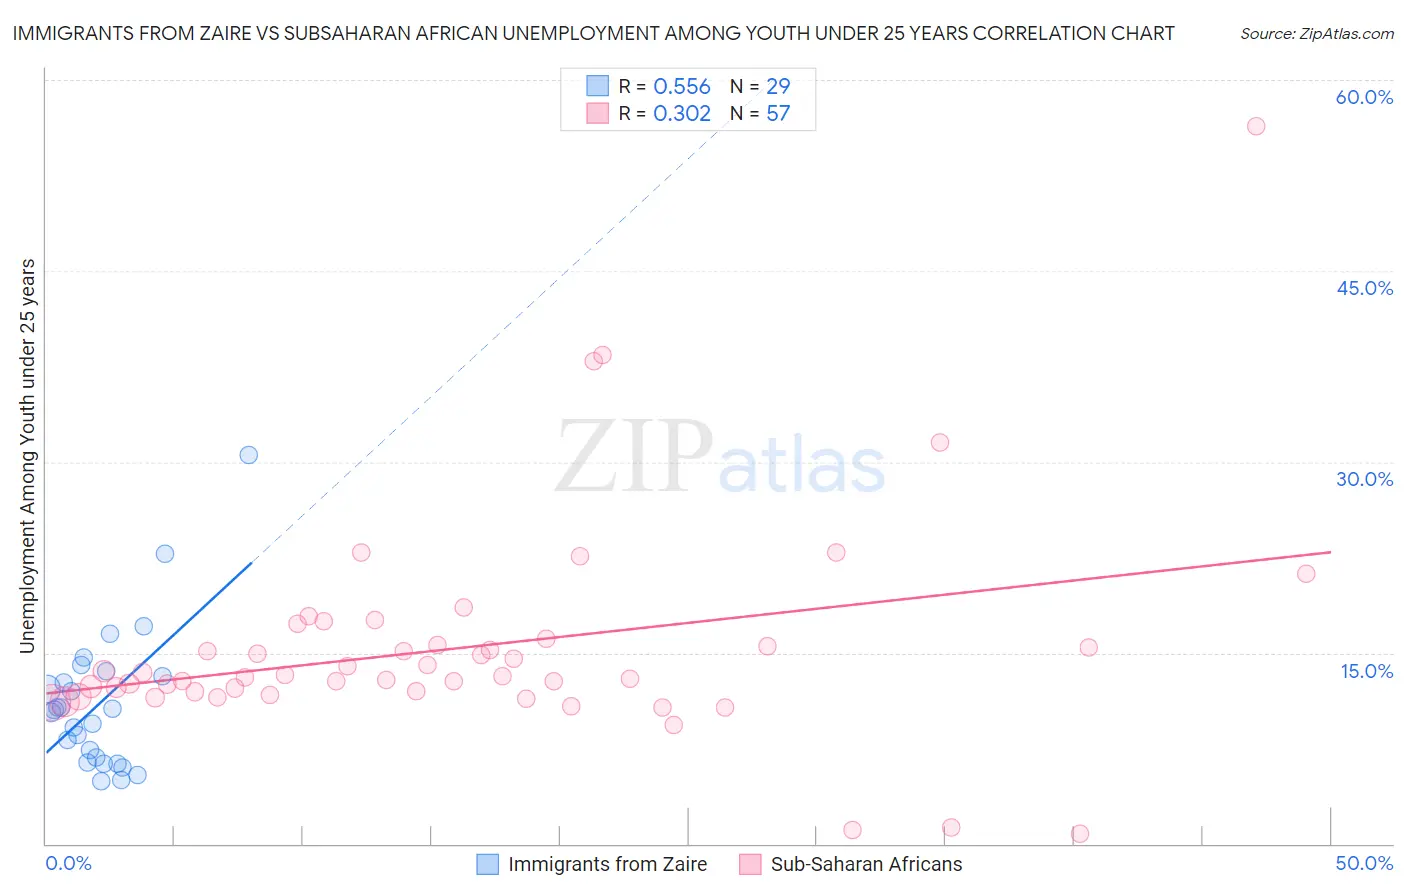 Immigrants from Zaire vs Subsaharan African Unemployment Among Youth under 25 years